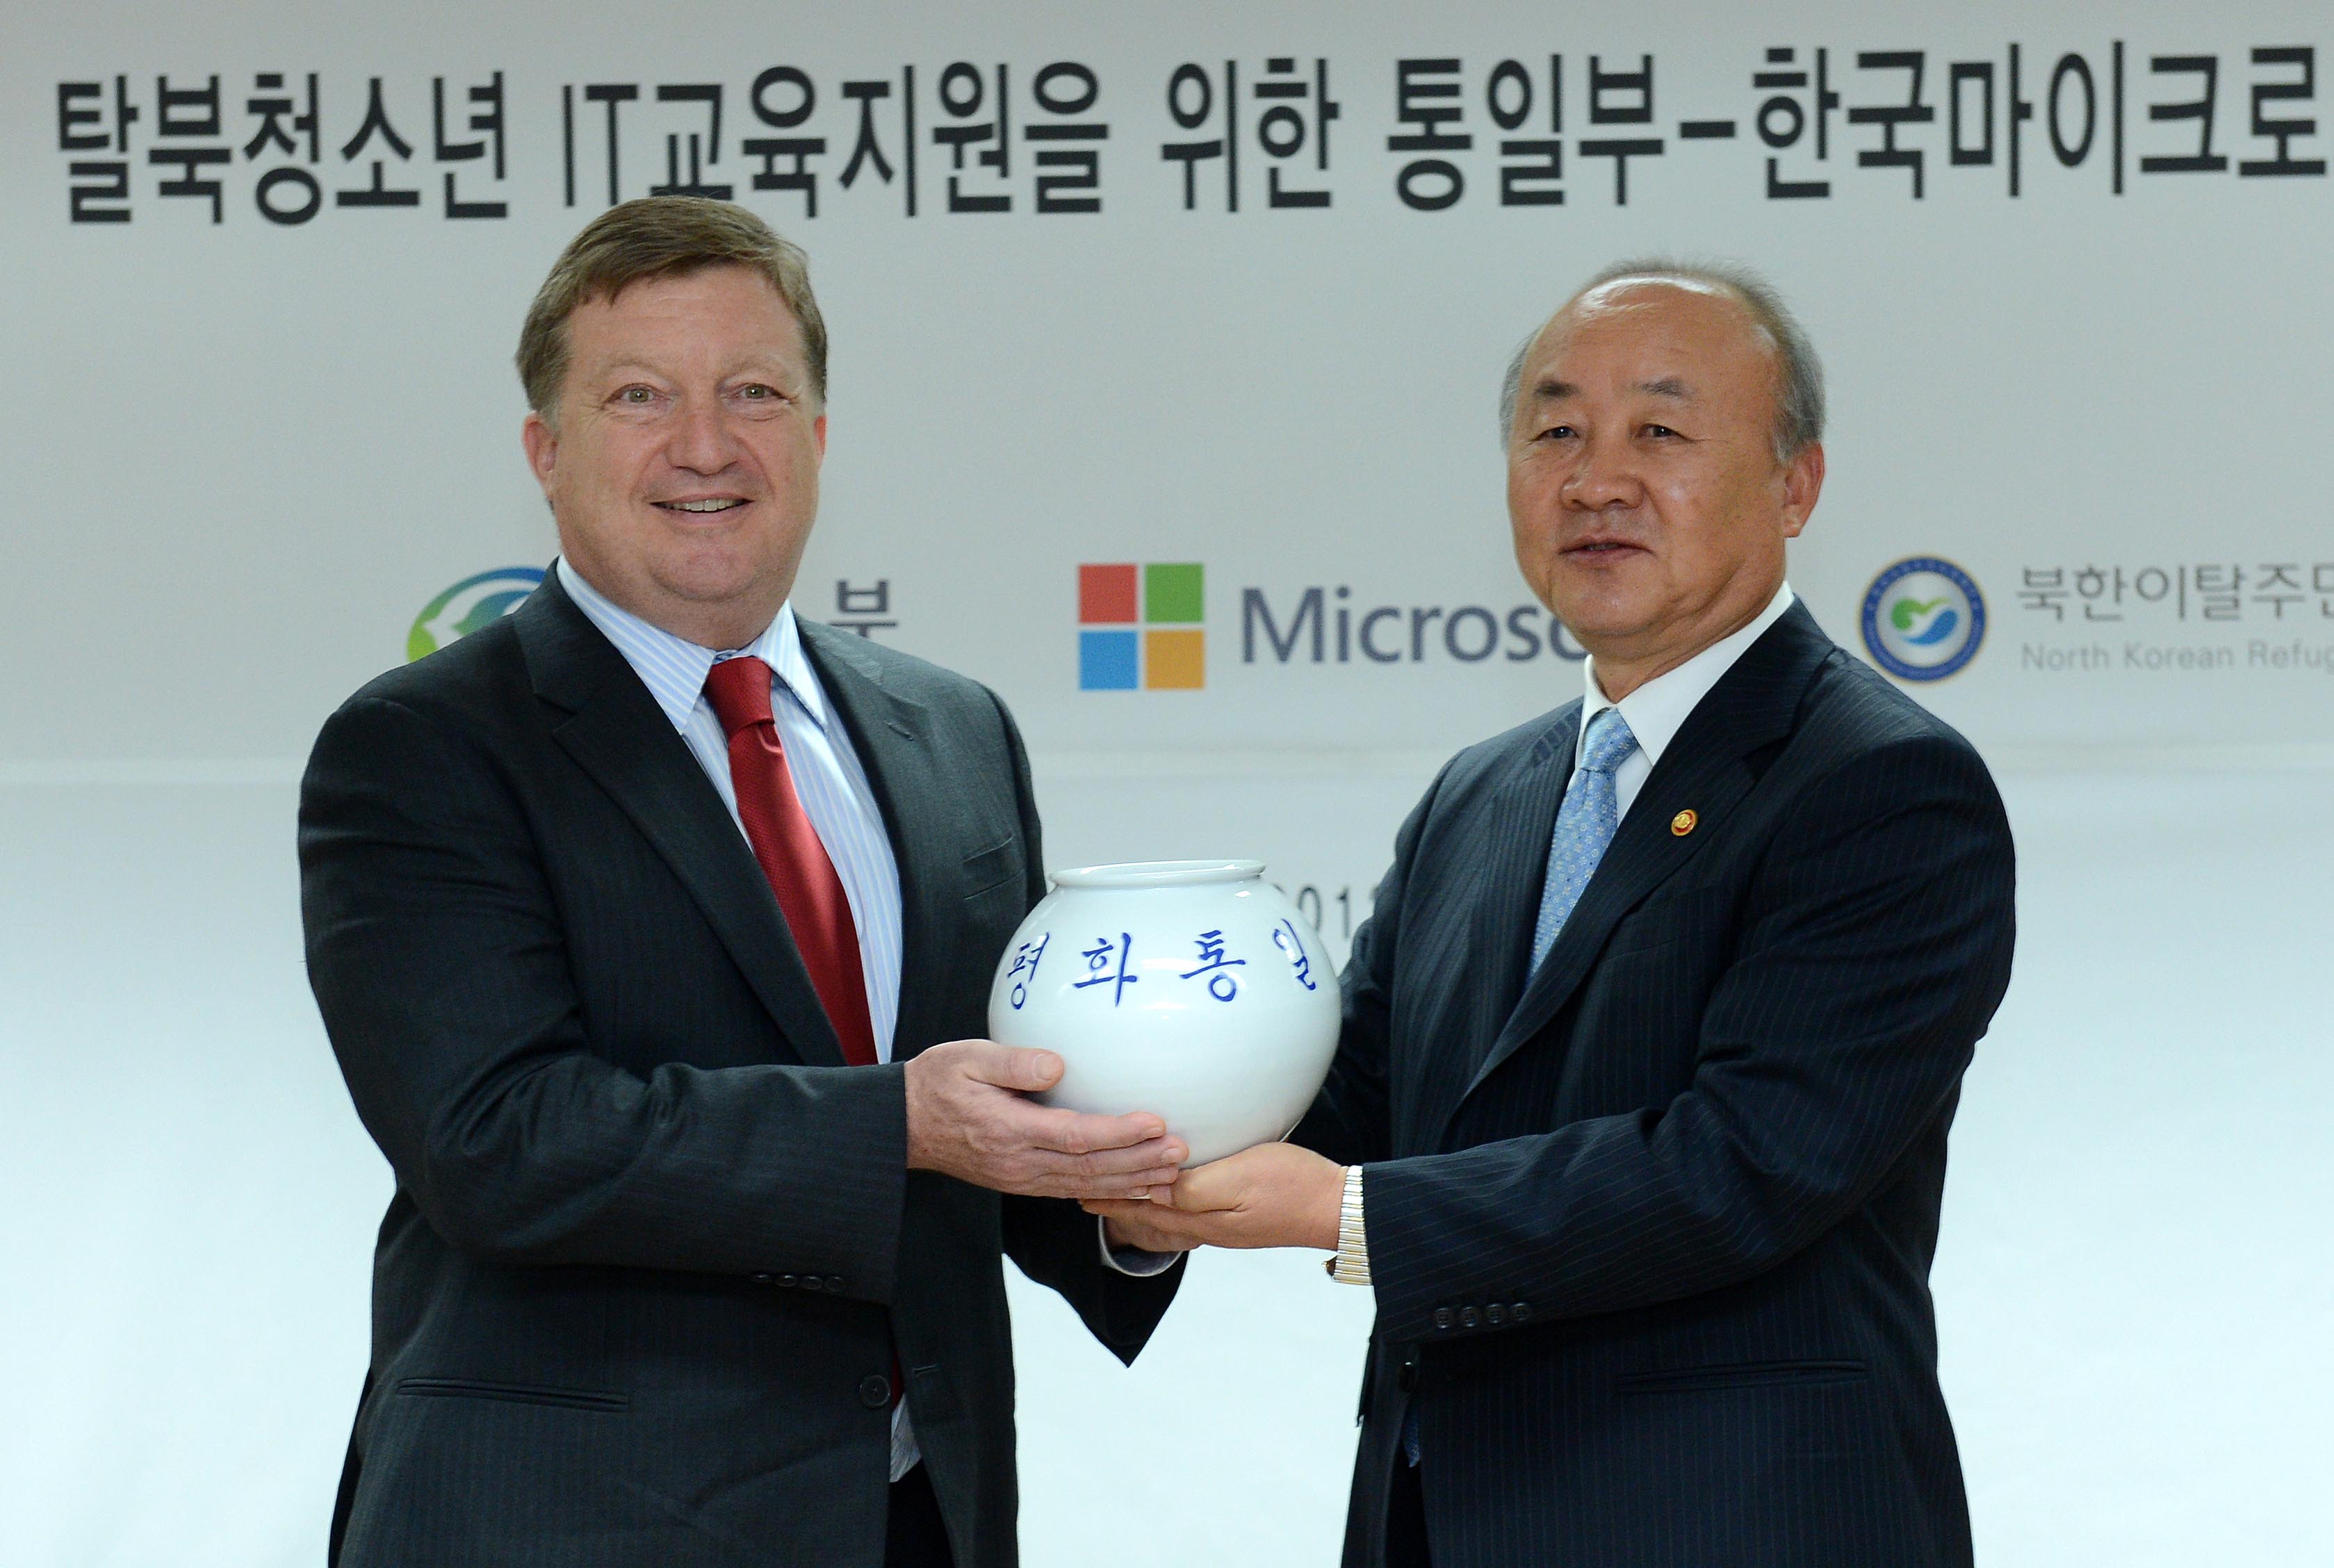 During the ceremony, Mr Shank said that Microsoft remains committed to bridging the opportunity divide in South Korea